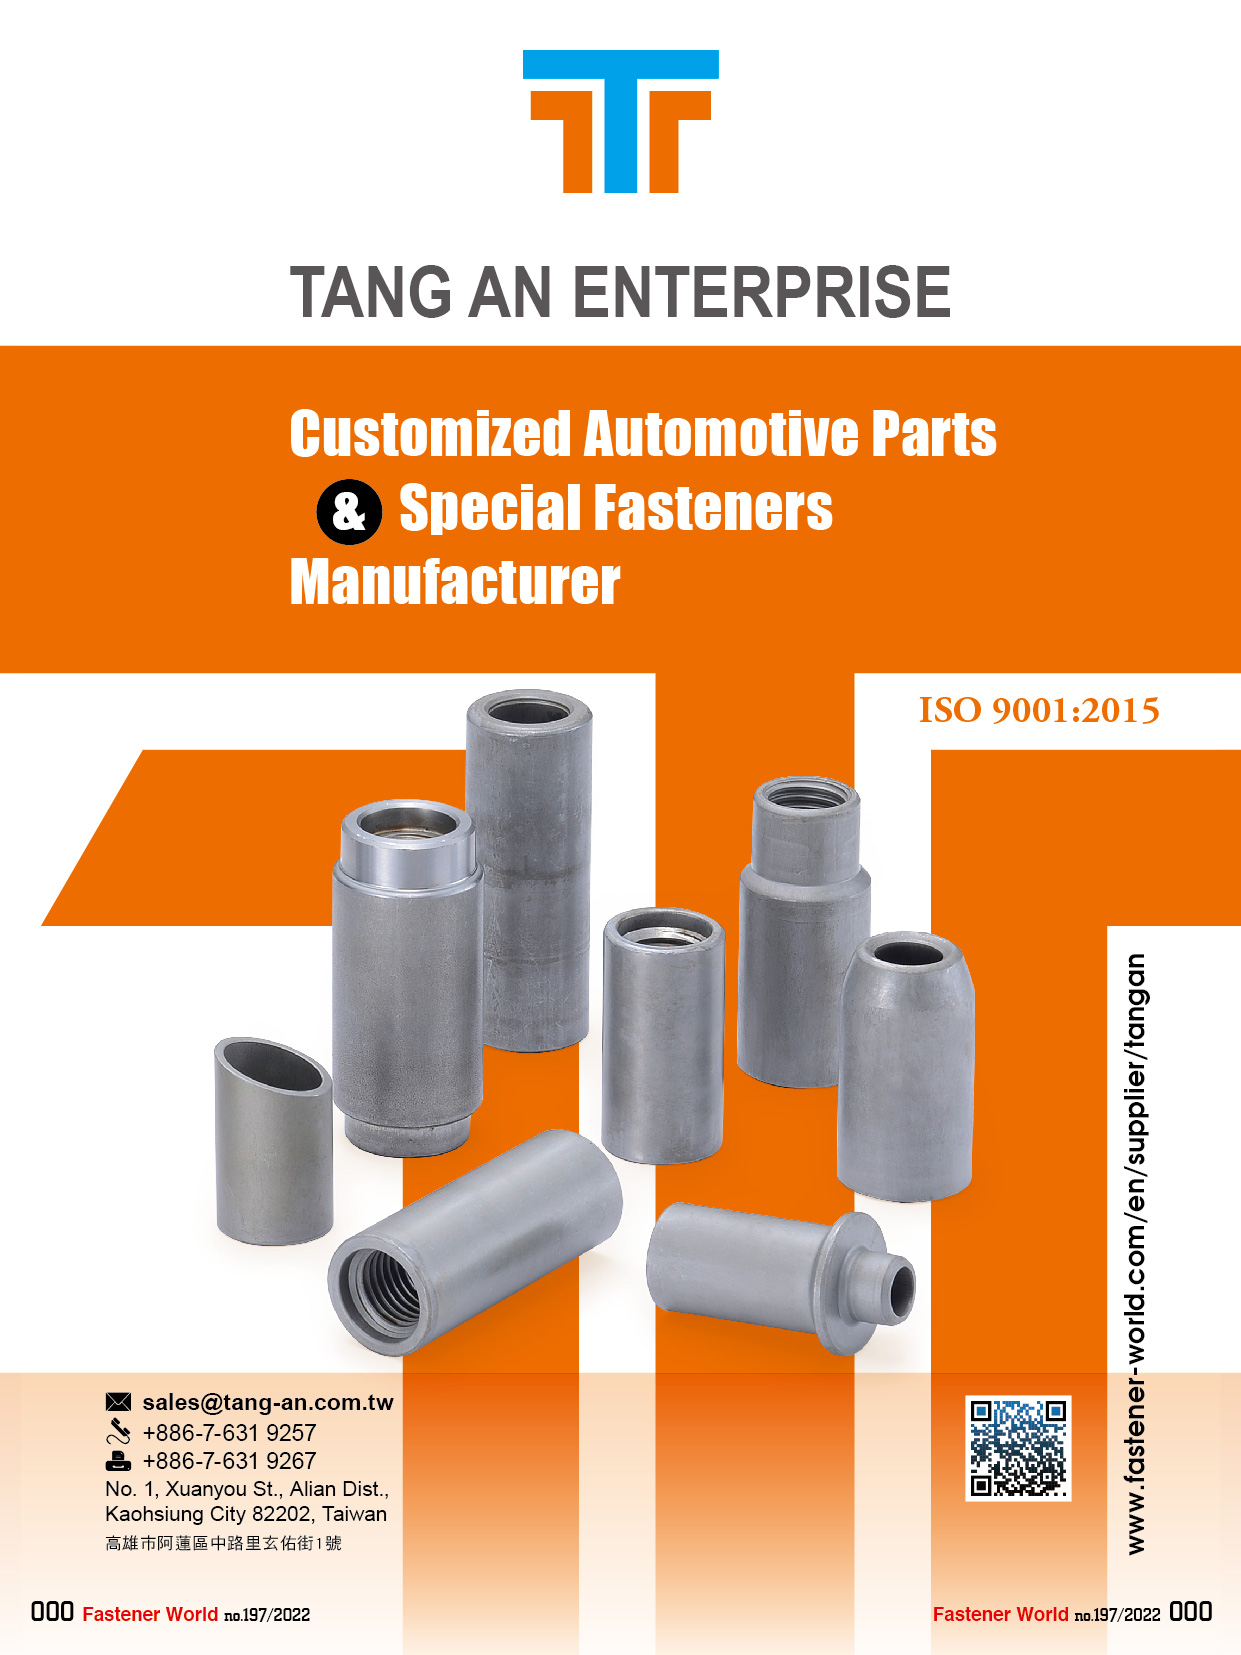 TANG AN ENTERPRISE CO., LTD. , Customized Automotive Parts, Special Fasteners